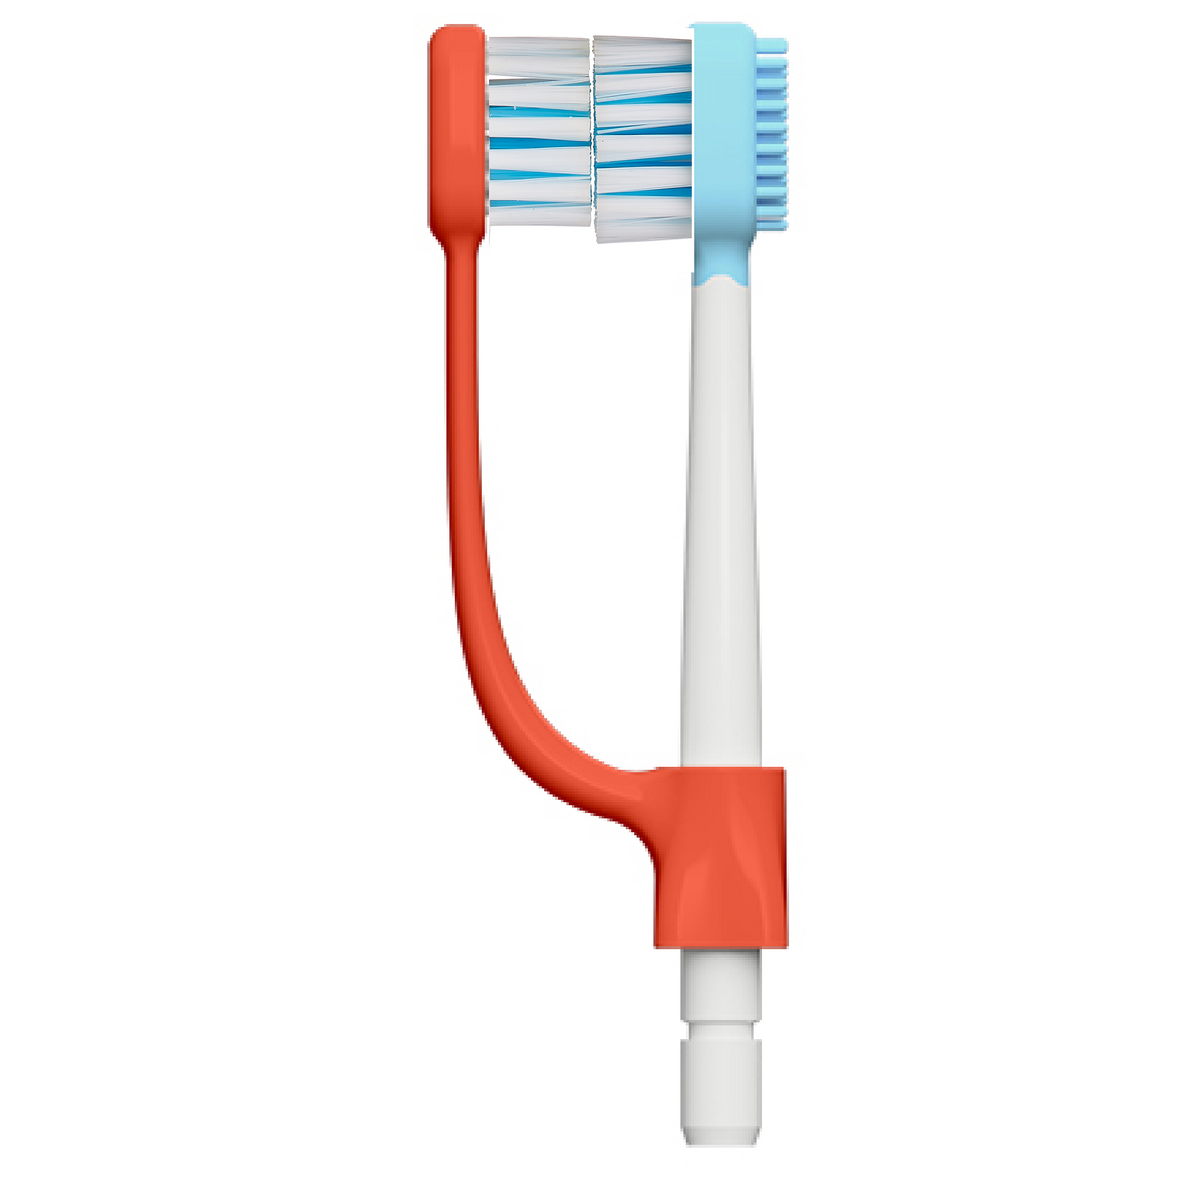 Red water flossing dual head toothbrush for brushing both sides of the teeth and water flossing. 